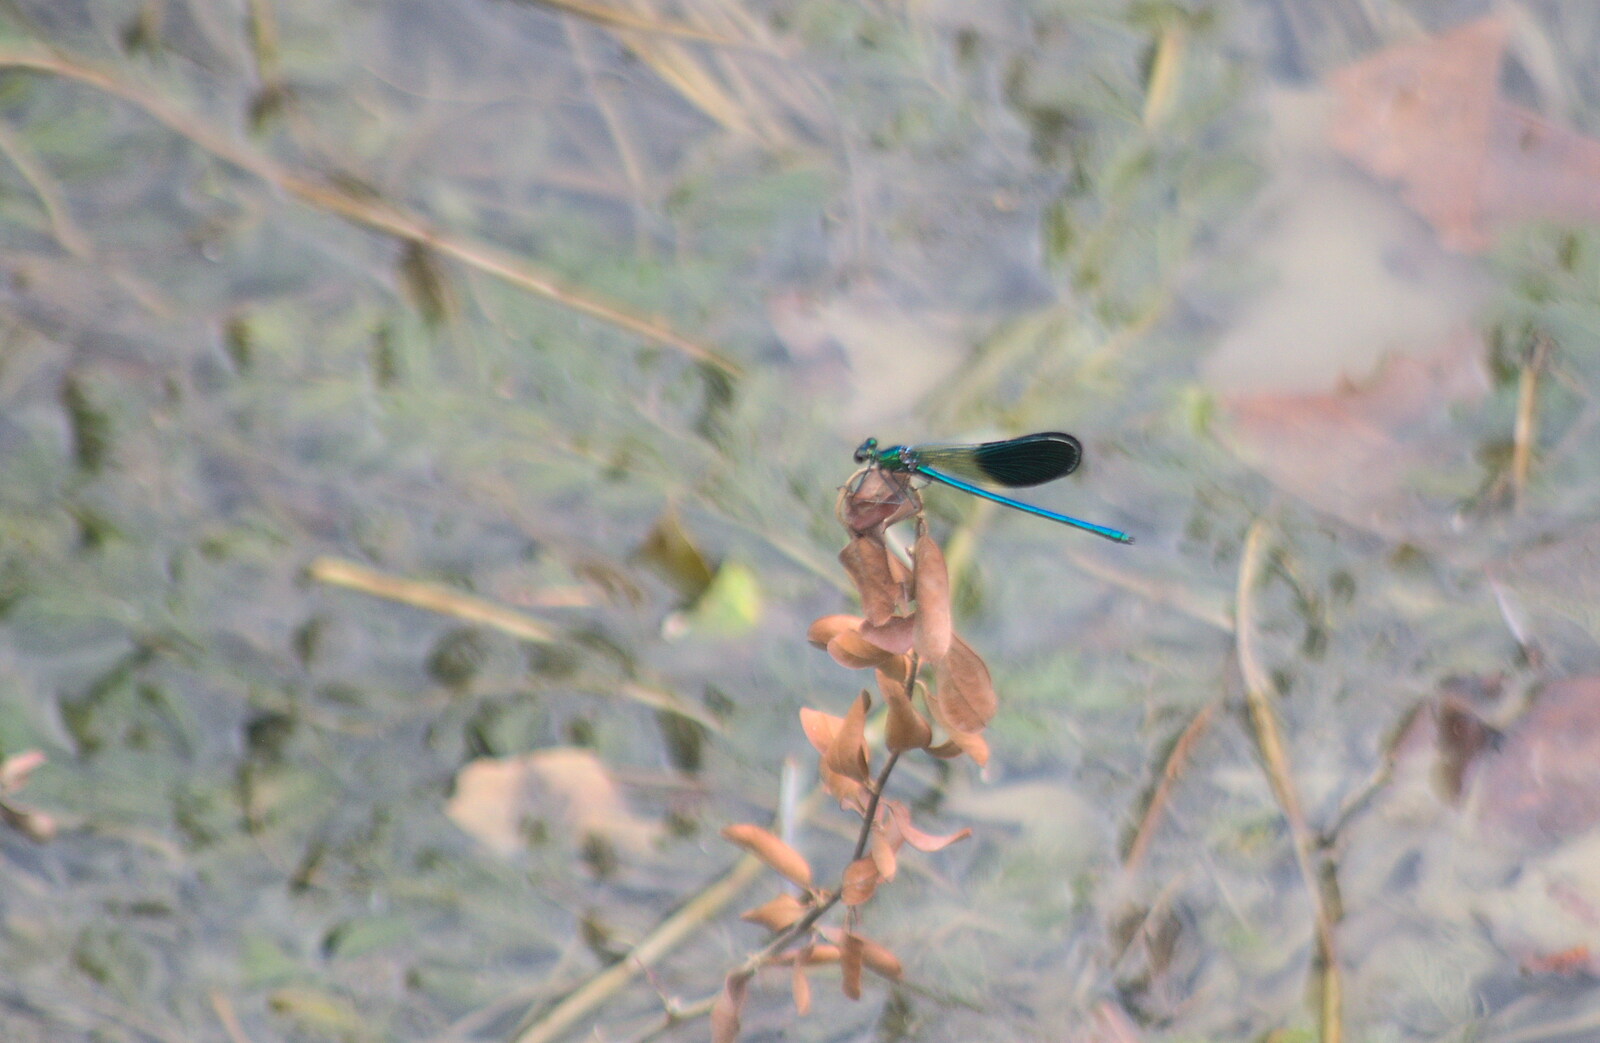 There's an interesting dragonfly down on the river from The Château Comtal, Lastours and the Journey Home, Carcassonne, Aude, France - 14th August 2018